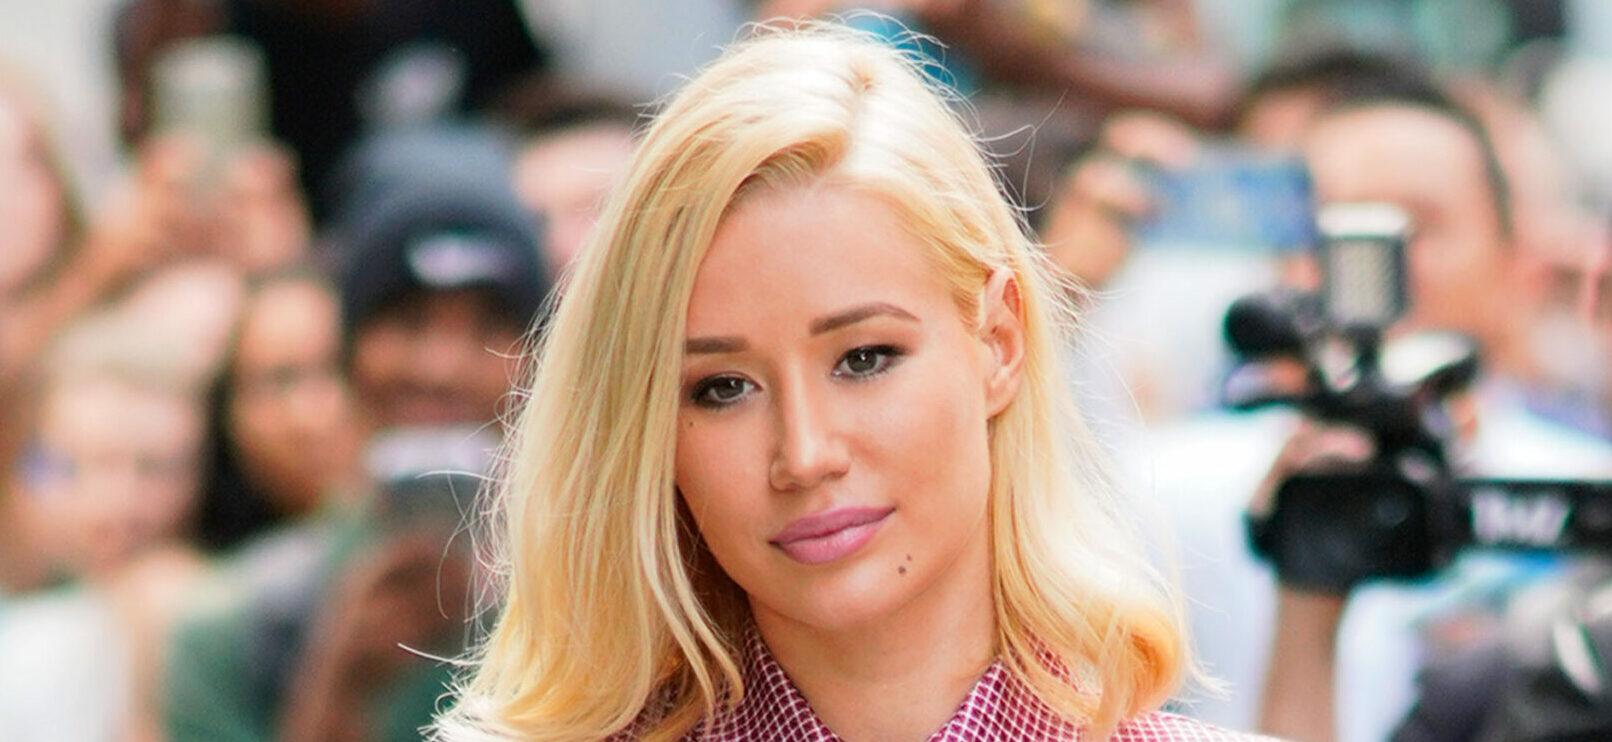 Iggy Azalea Gives Up Release Date For New Tune Amid Tory Lanez Support Backlash